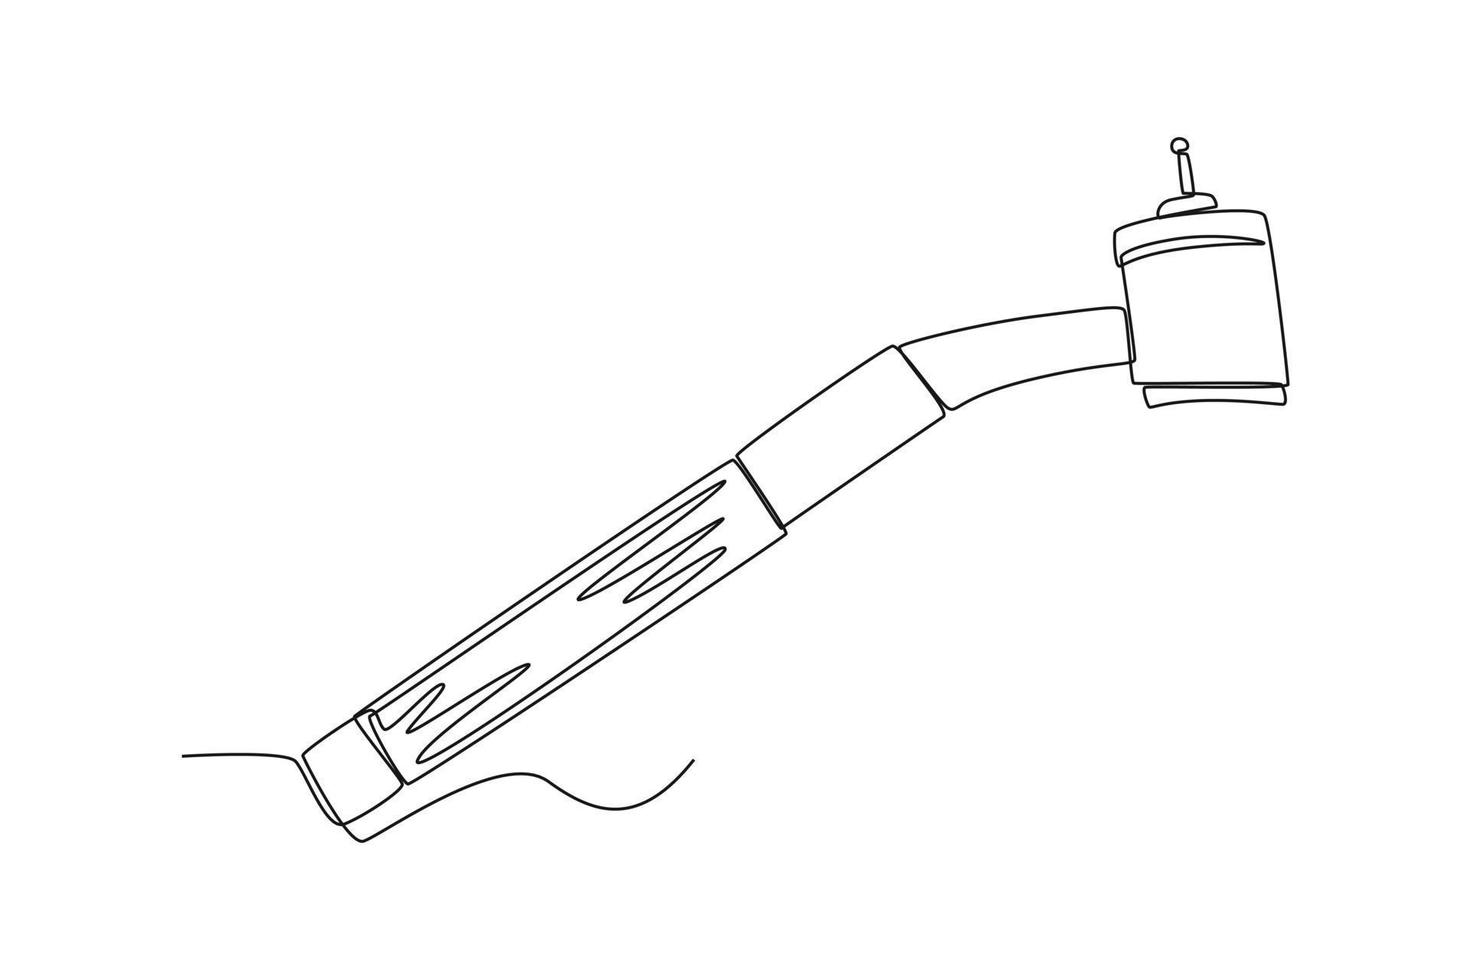 Continuous one line drawing electric toothbrush for cleaning teeth. Dental health concept. Single line draw design vector graphic illustration.